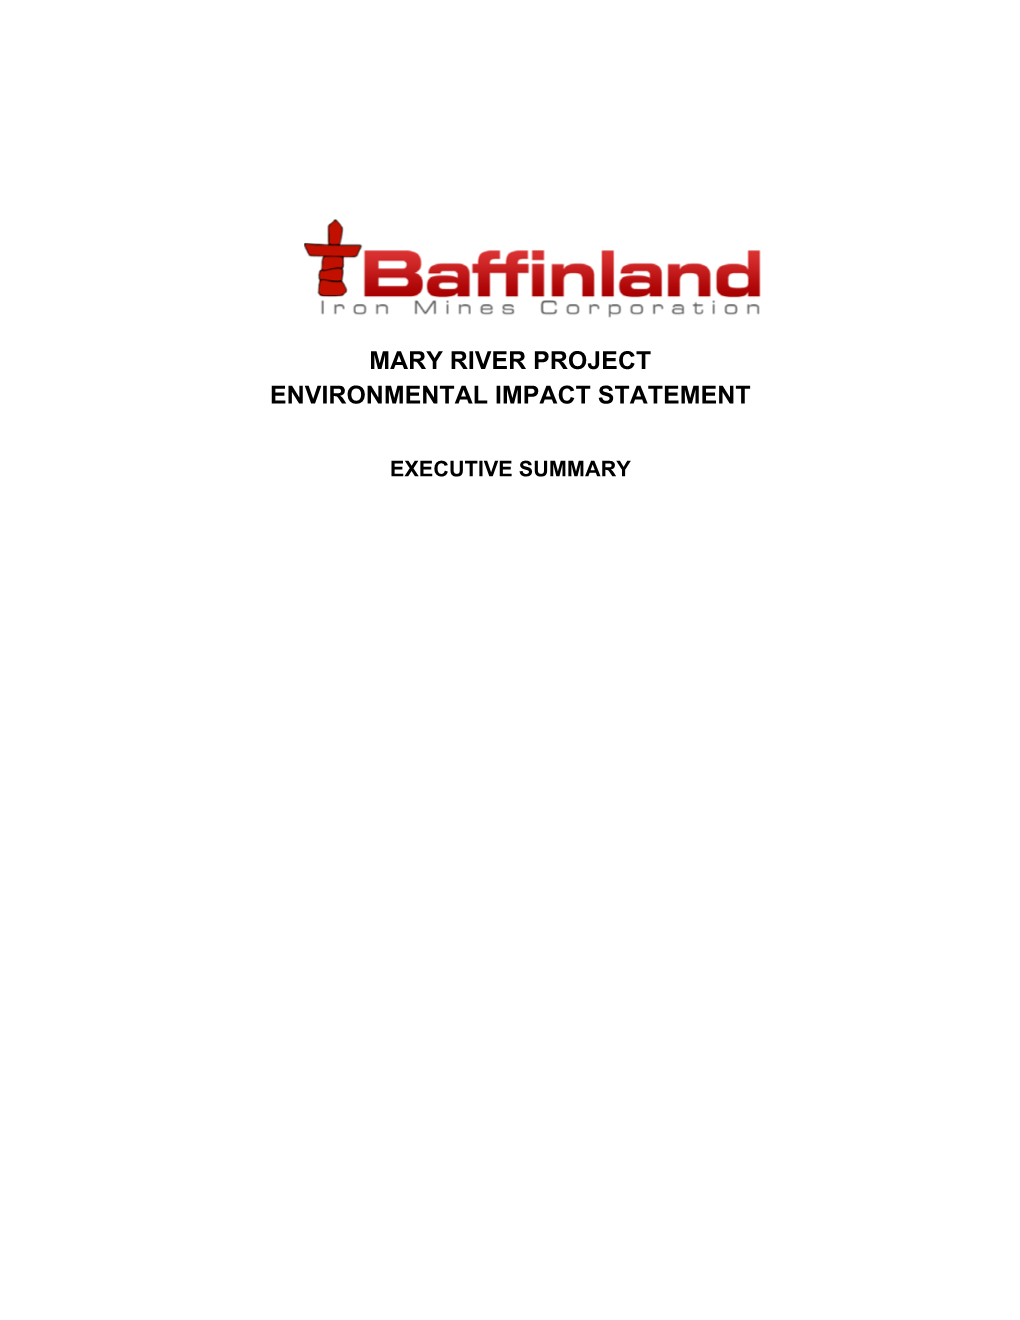 Mary River Project Environmental Impact Statement